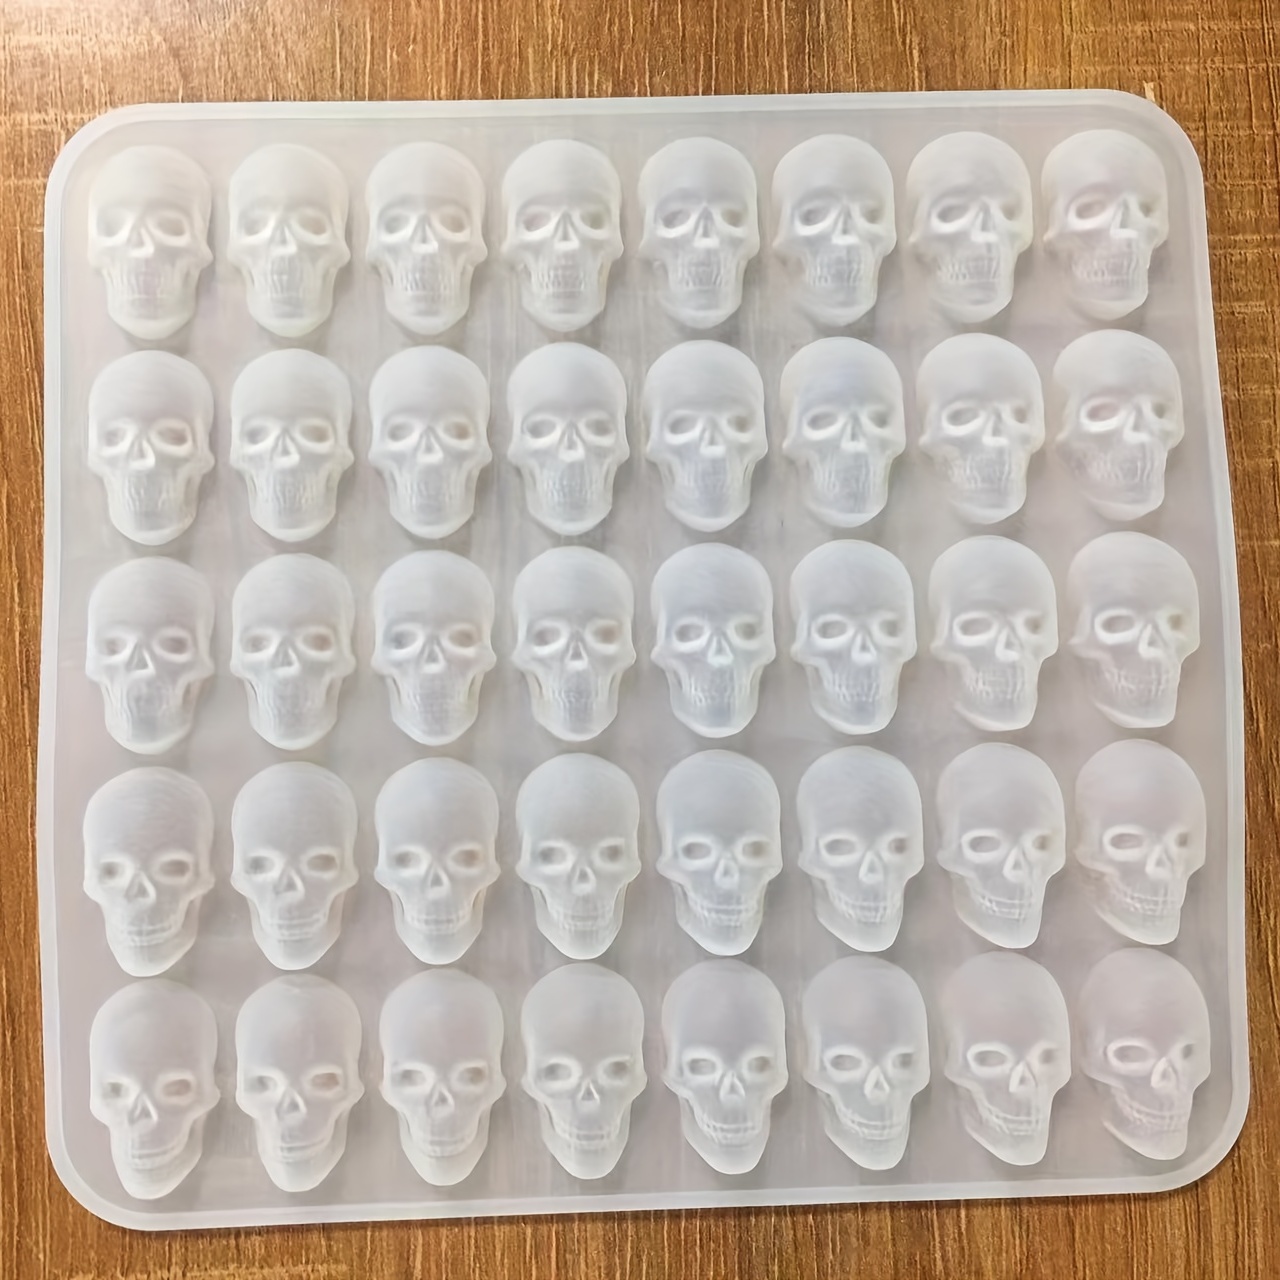 2pcs/set 40-cavity Silicone Ice Cube Tray Mold For Chocolate, Candy, Jelly,  Skull Shaped Gummy And Dropper Mold